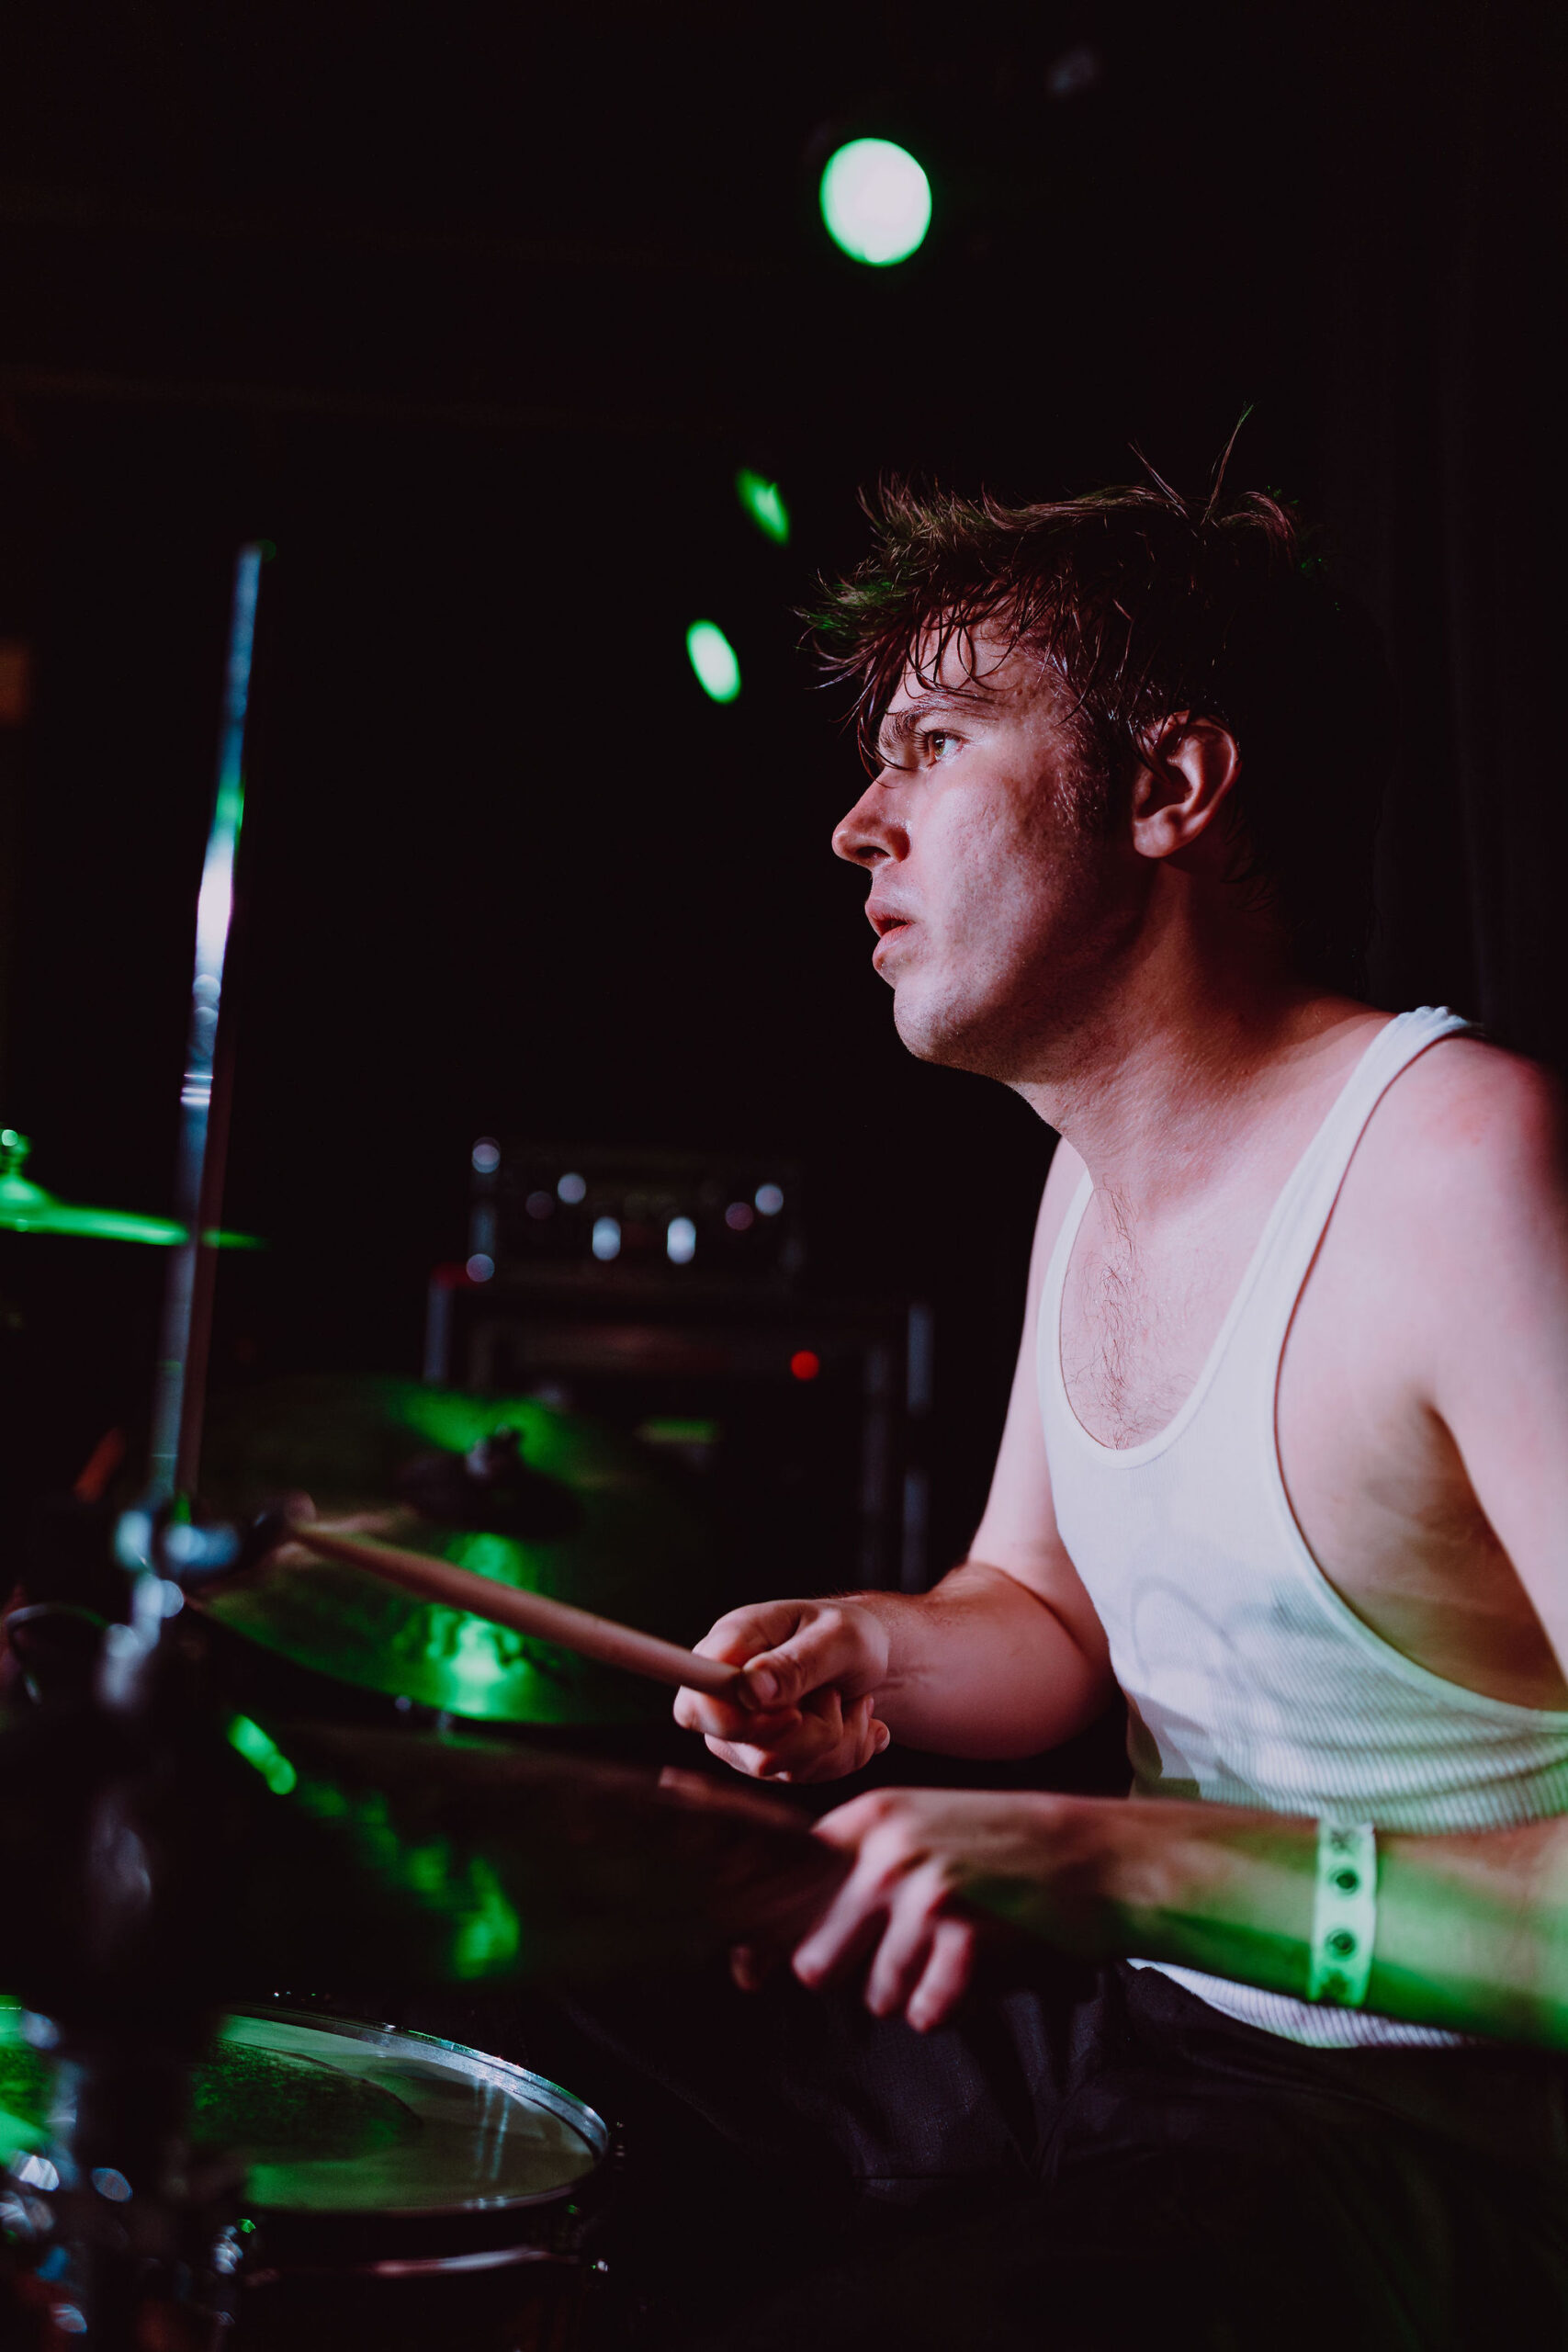 A male drummer warming up with a dark background